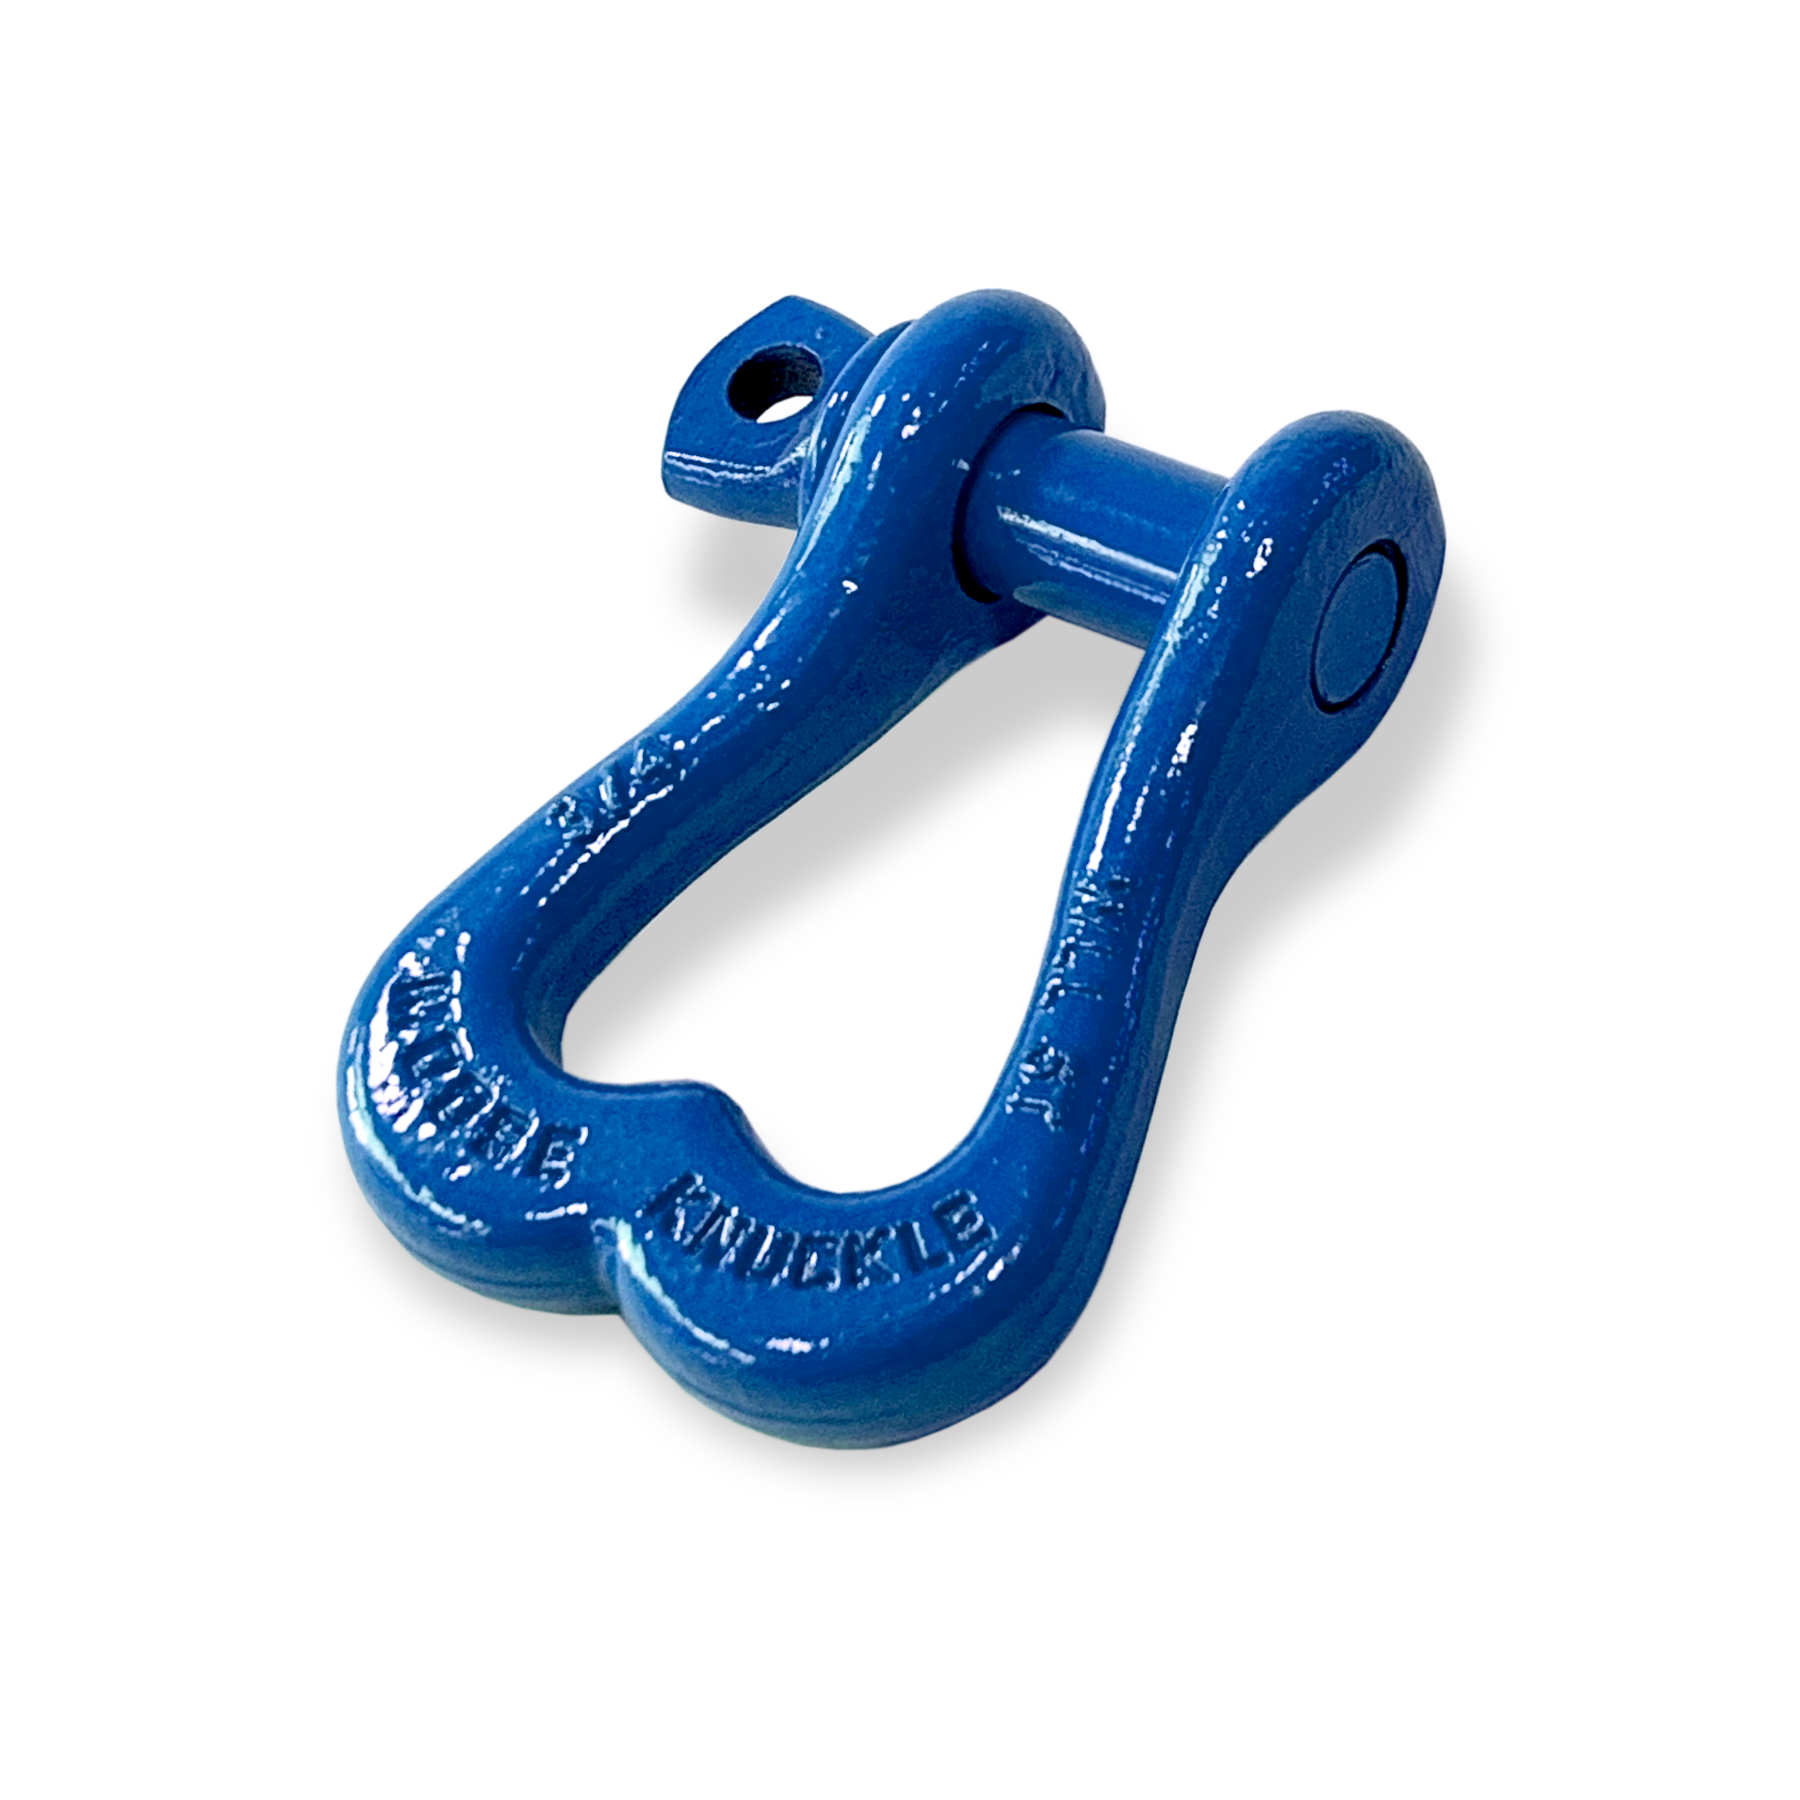 Moose Knuckle XL Blue Balls Powder Coated Colored Shackle for Tow Straps, Off Roading and Truck Nuts Vehicle Recovery